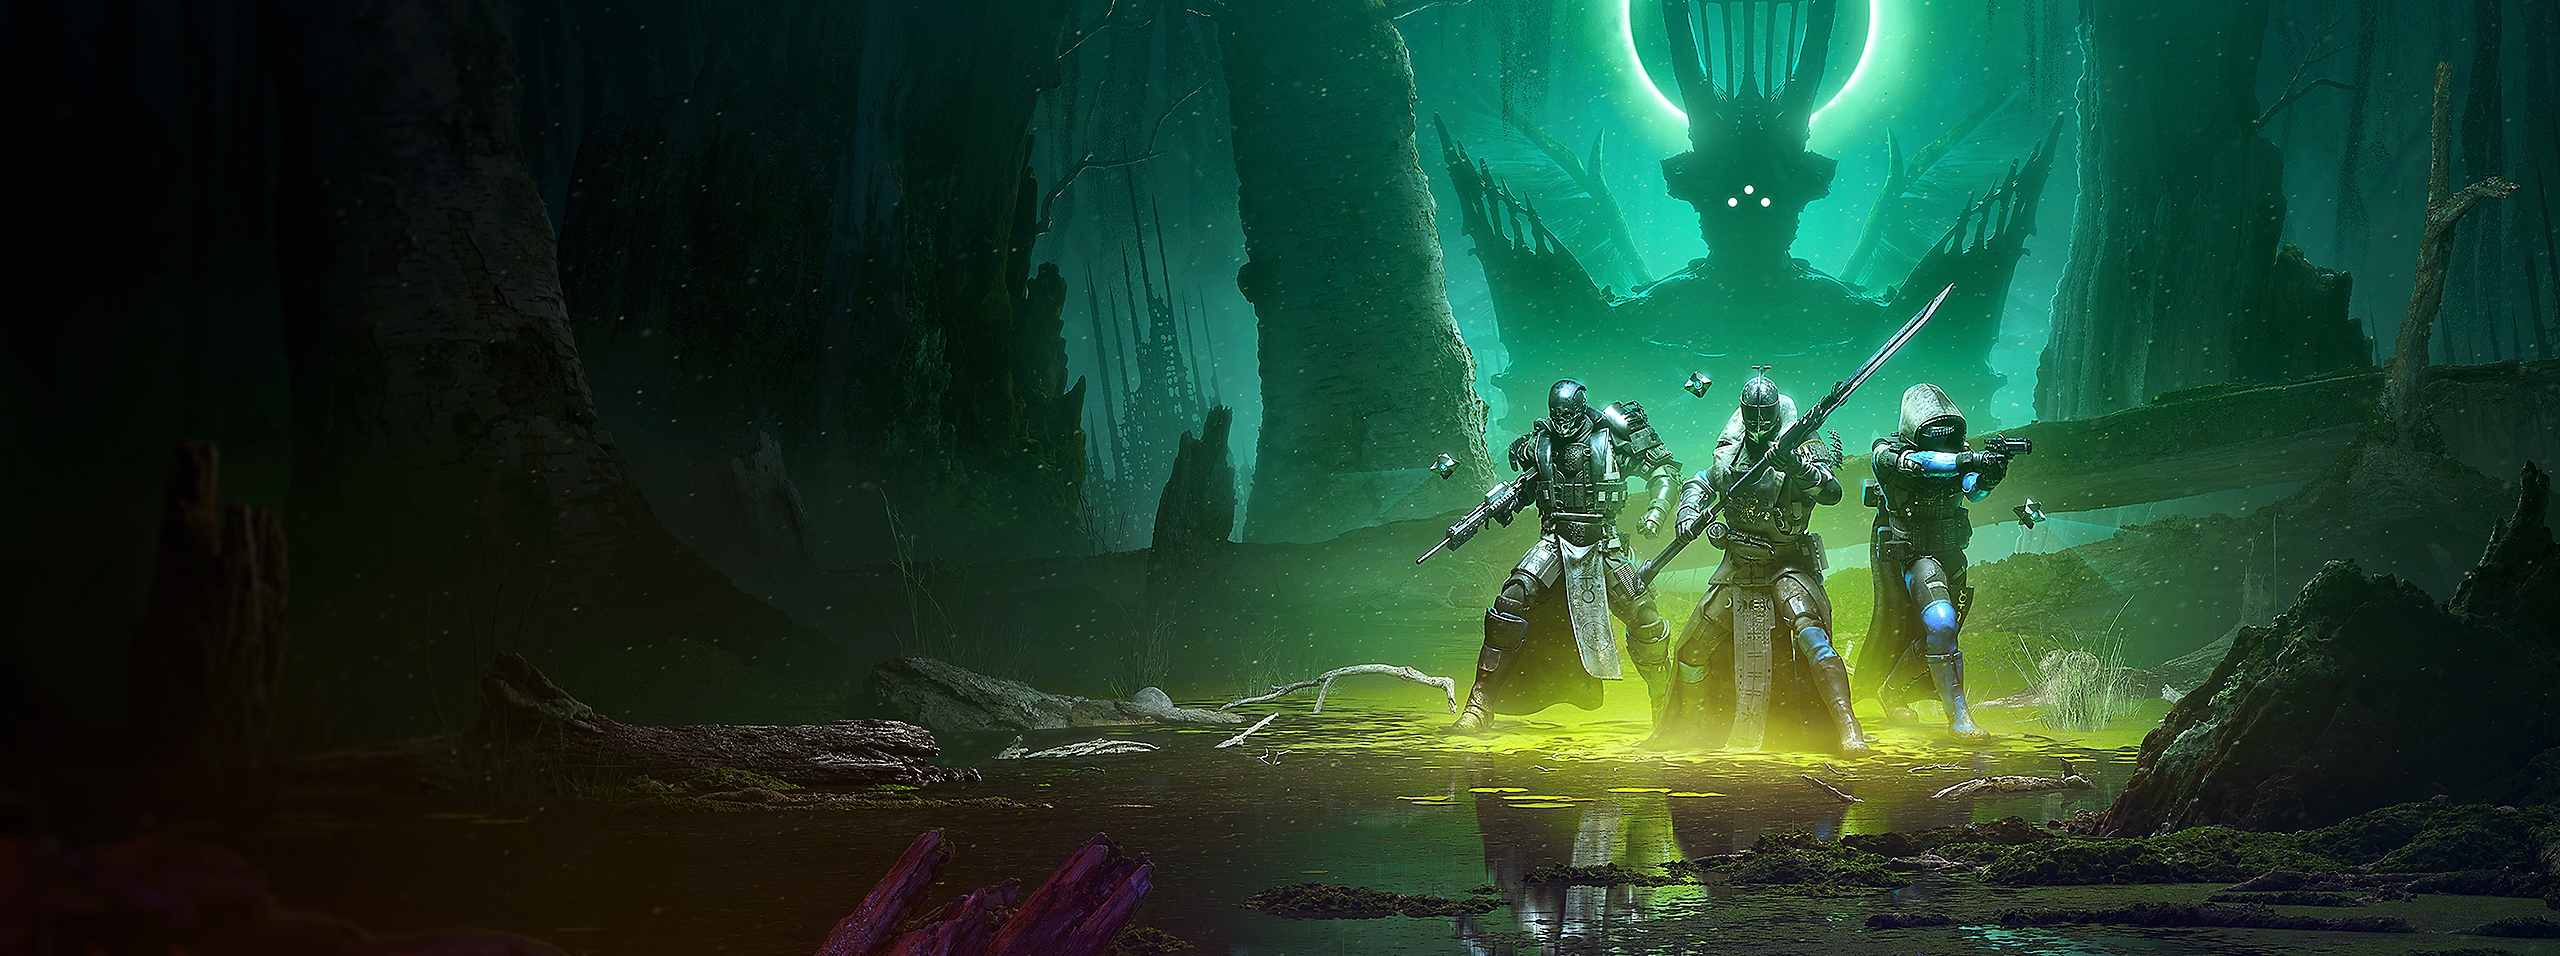 Key art for Destiny 2 The Witch Queen, featuring three Guardians moving through an alien environment.